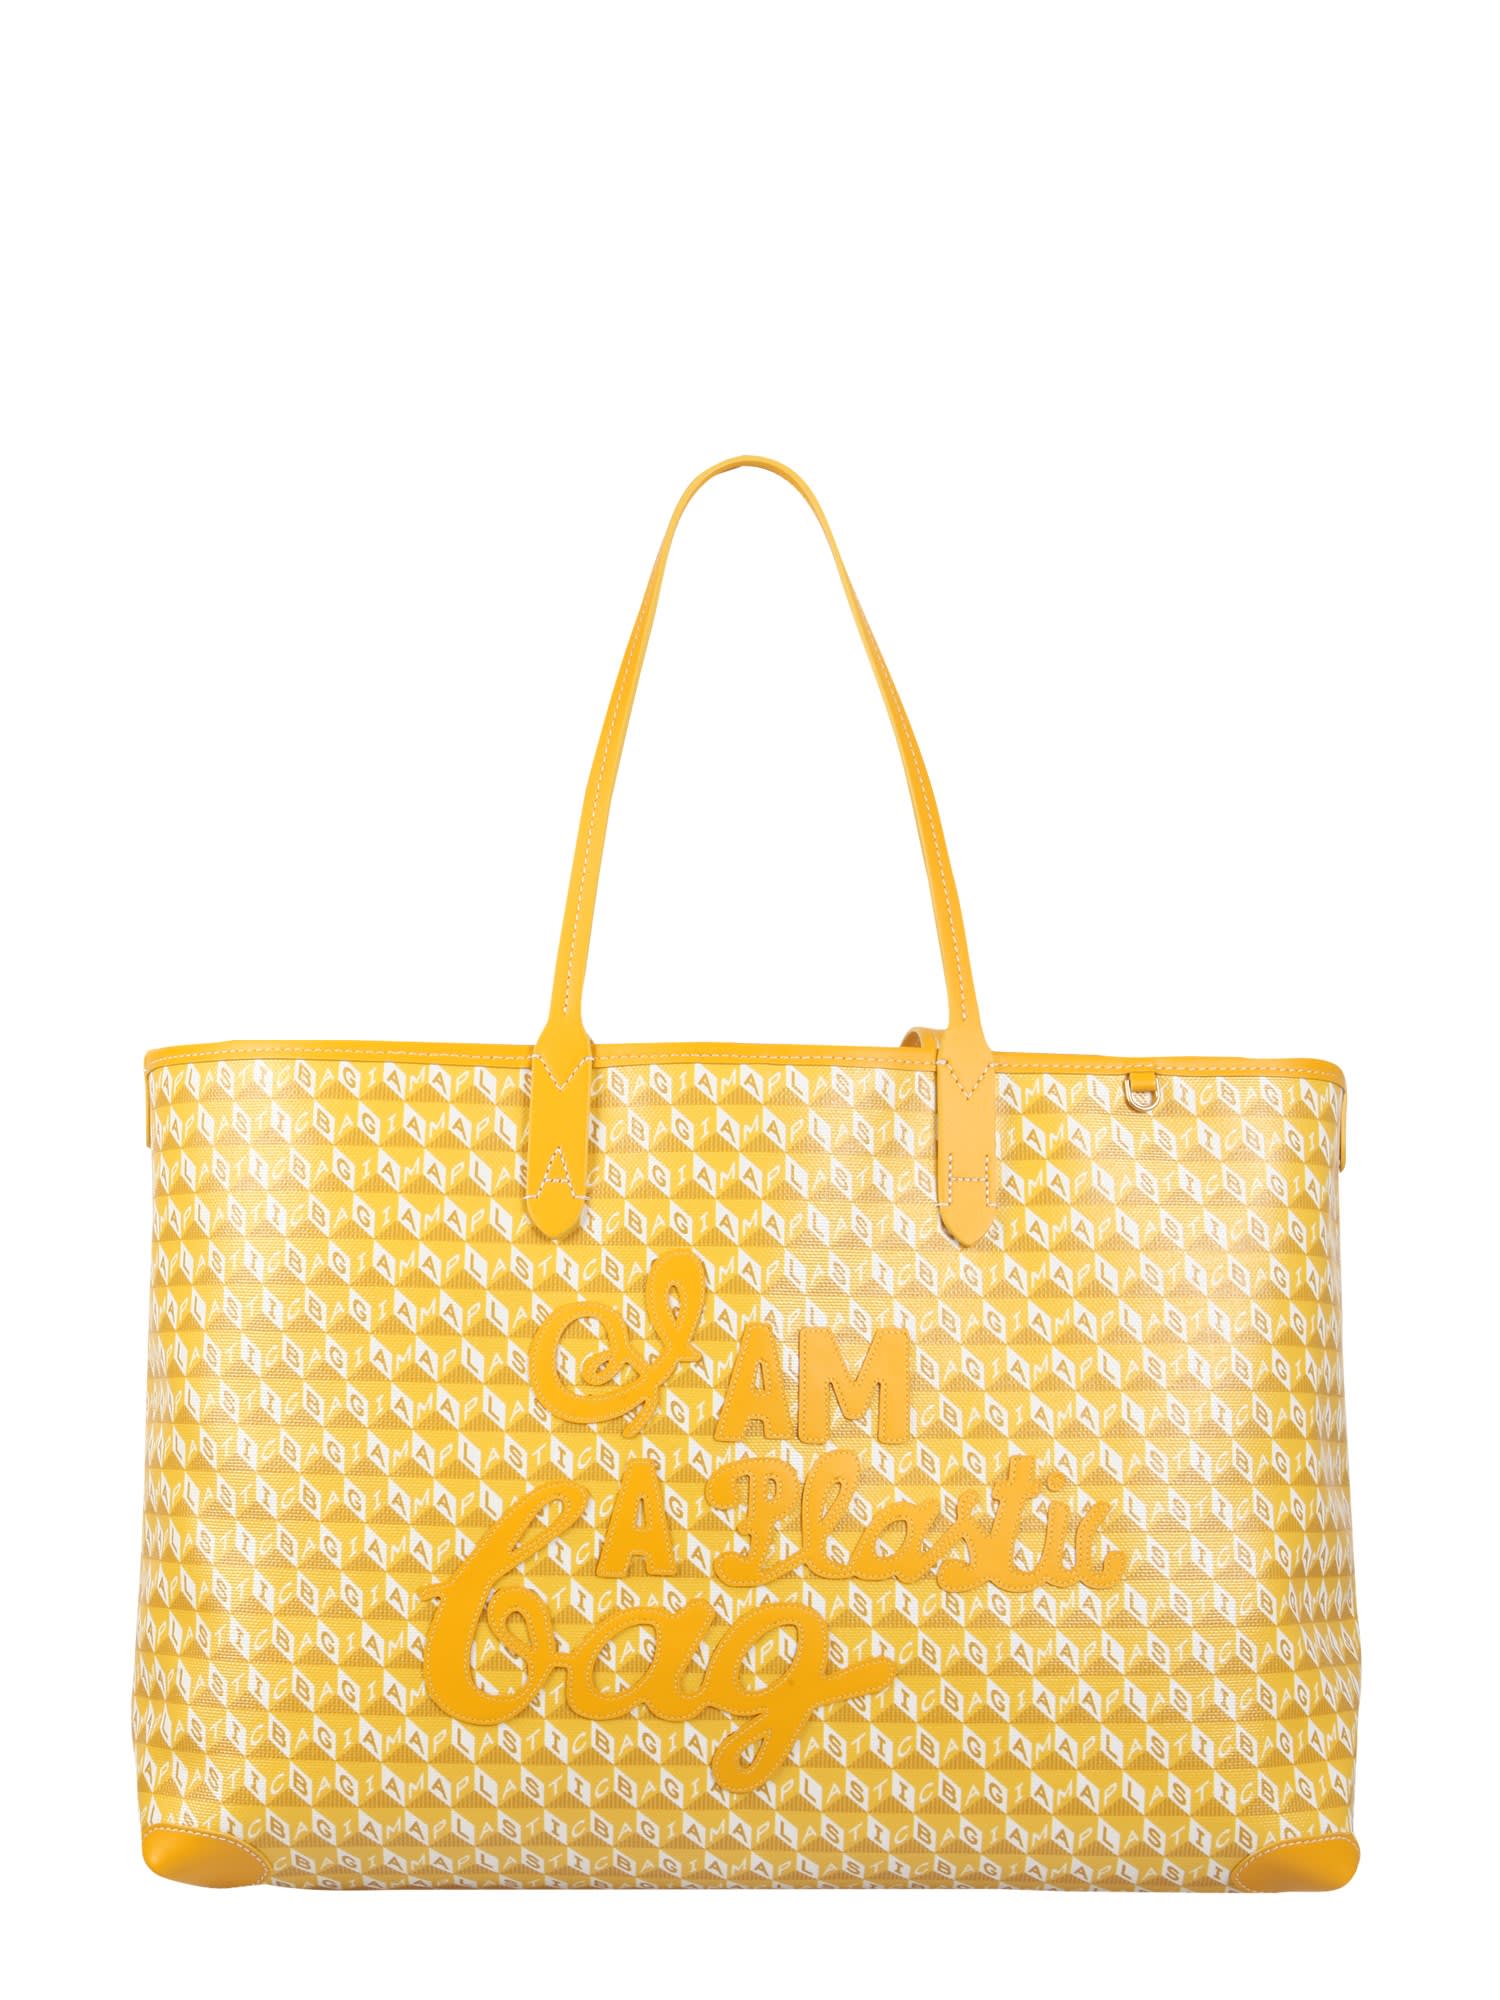 Anya Hindmarch Tote Bag With i Am A Plastic Bag Pattern